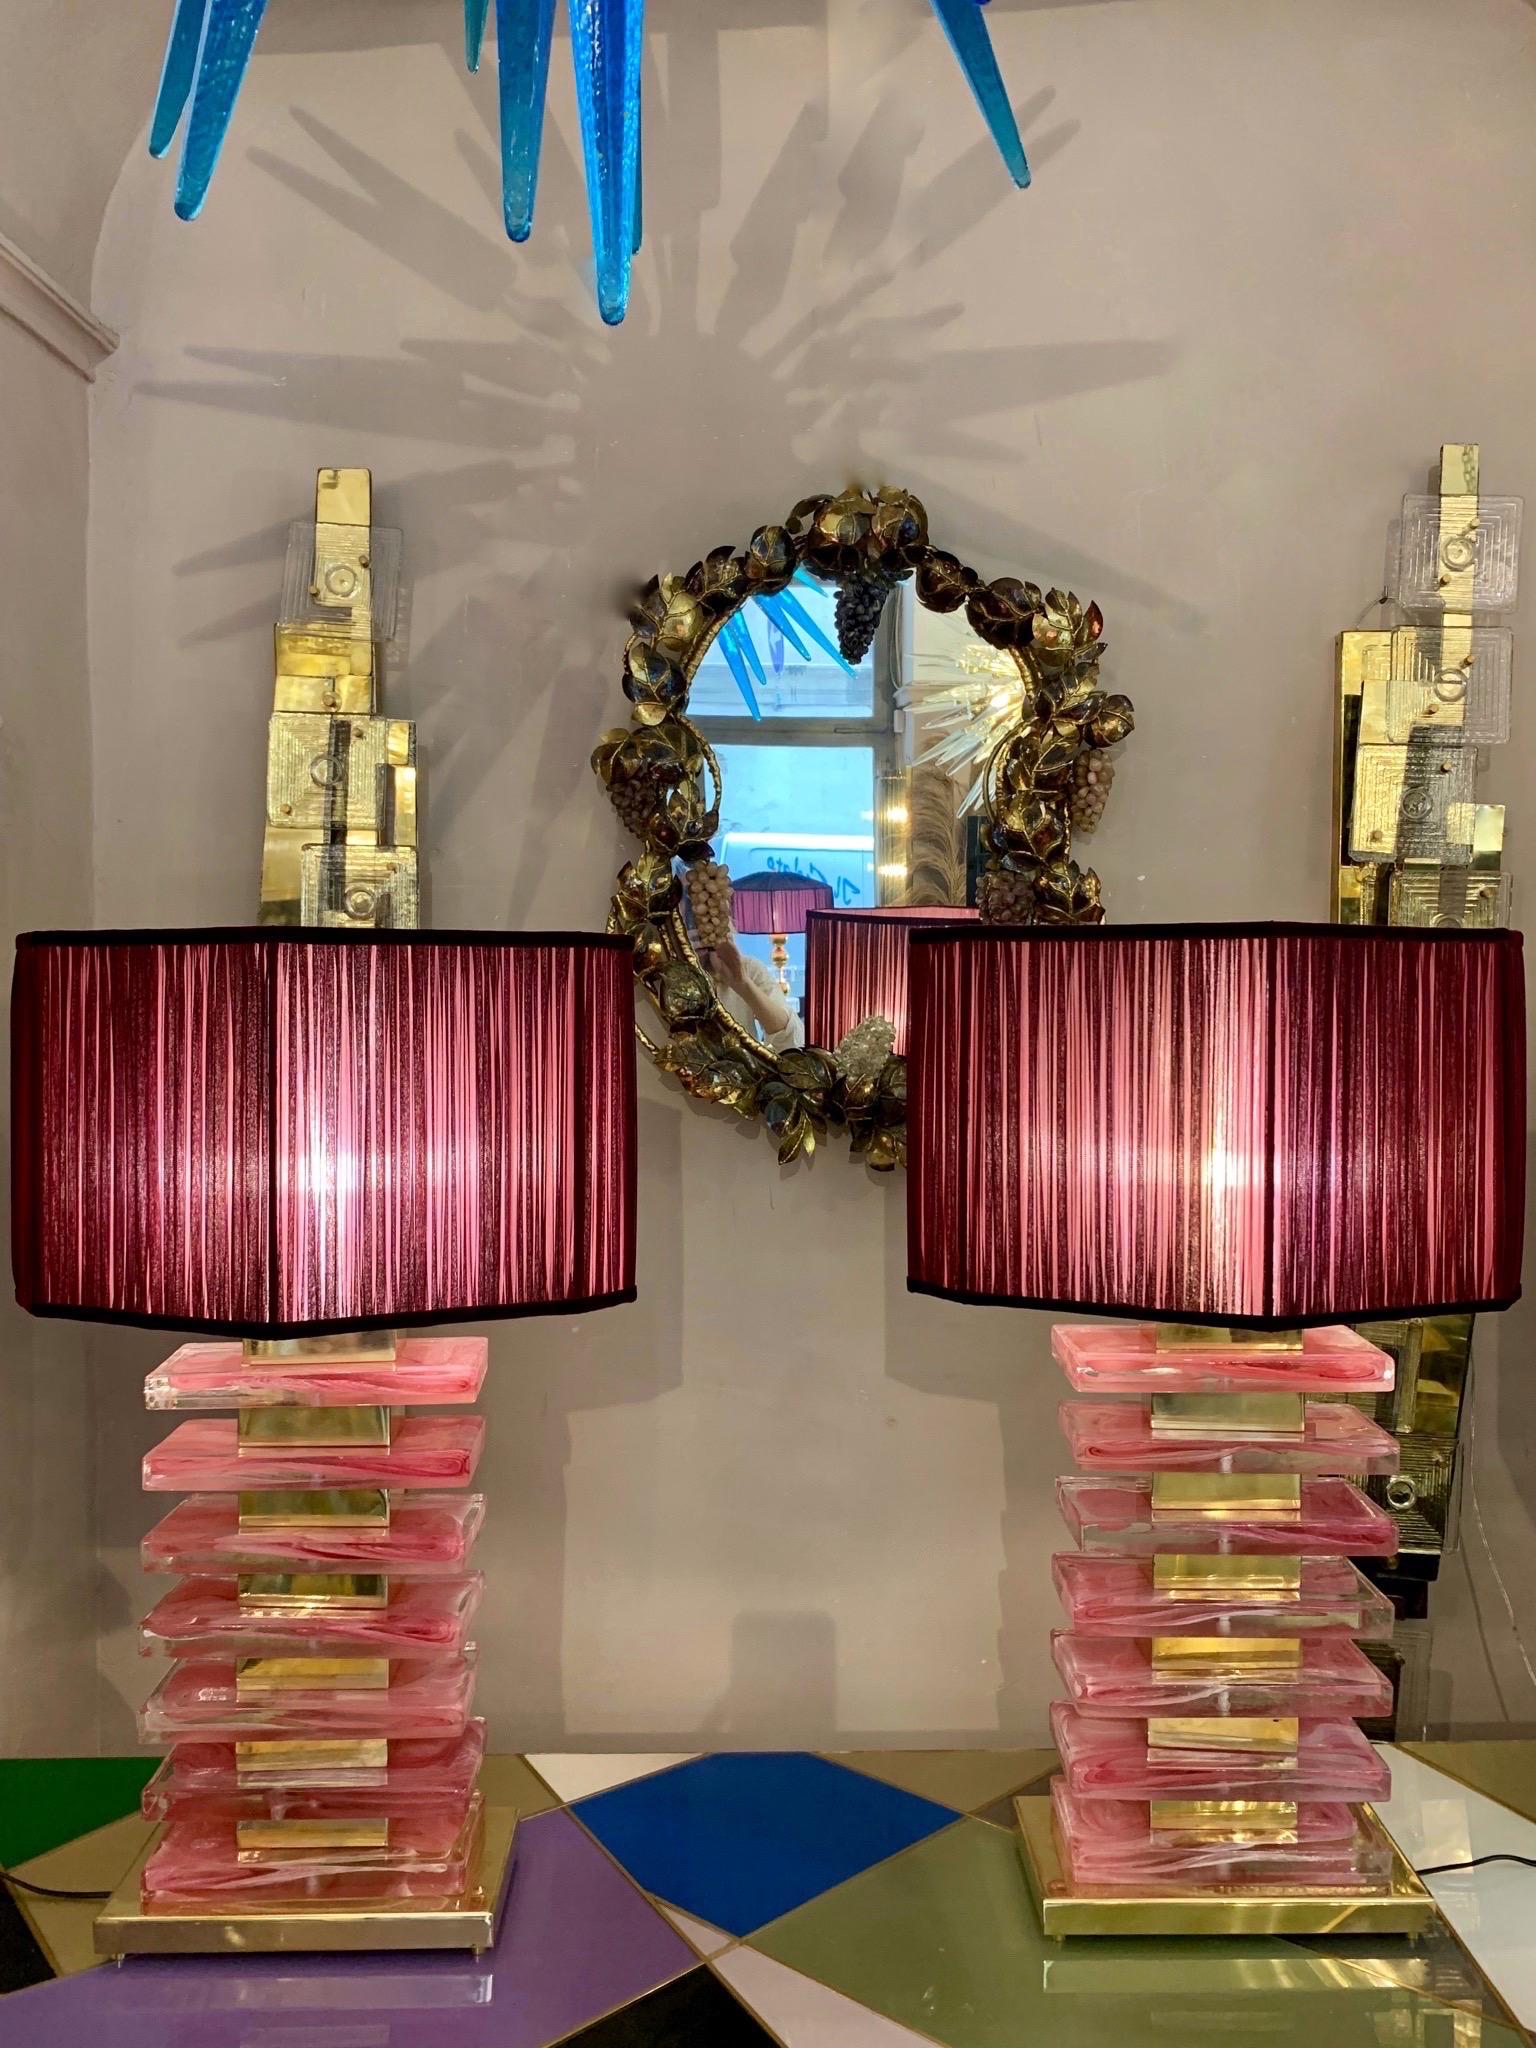 Pair of pink Murano glass blocks table lamps with brass fittings and our lampshades.
The Murano glass pink blocks are hand blown with clear Murano glass creating a mixed effect. The blocks are thick and heavy. The double color lampshades are